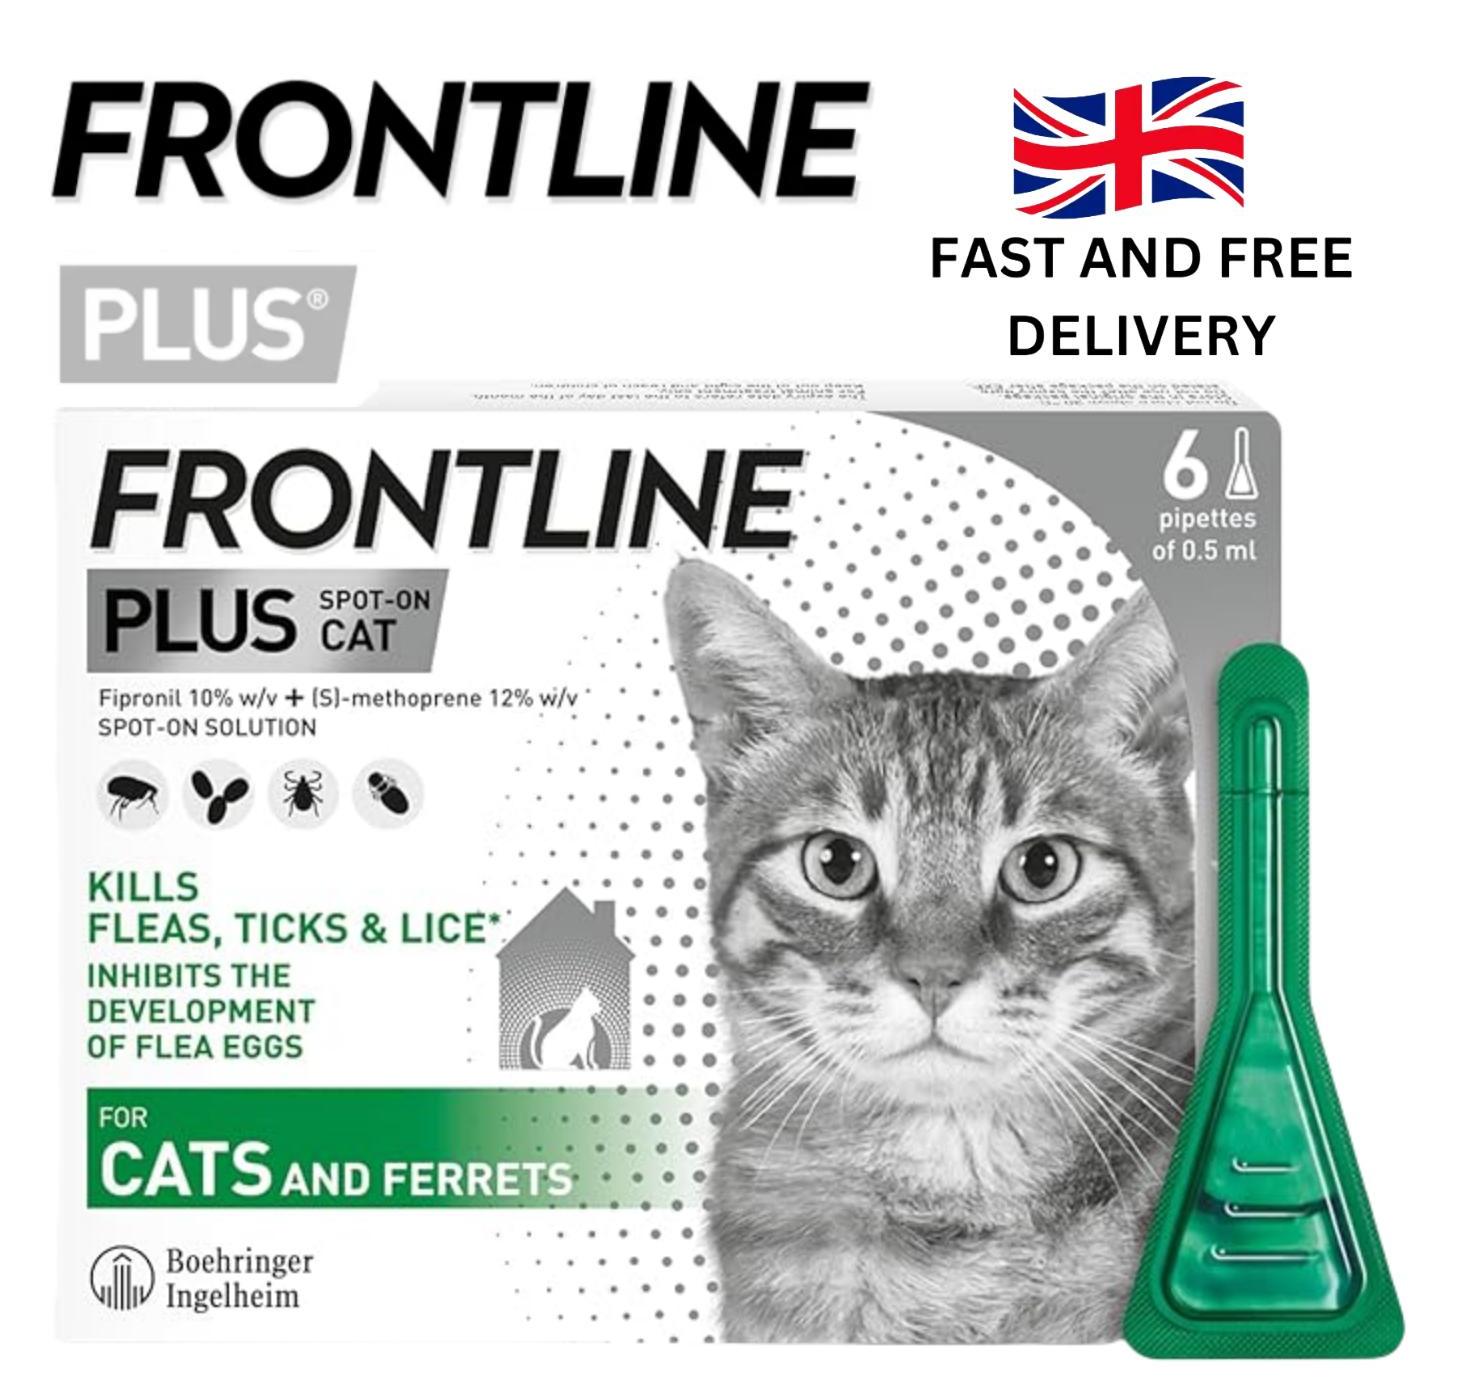 FRONTLINE Plus Flea & Tick Treatment for Cats and Ferrets - 6 Pipettes